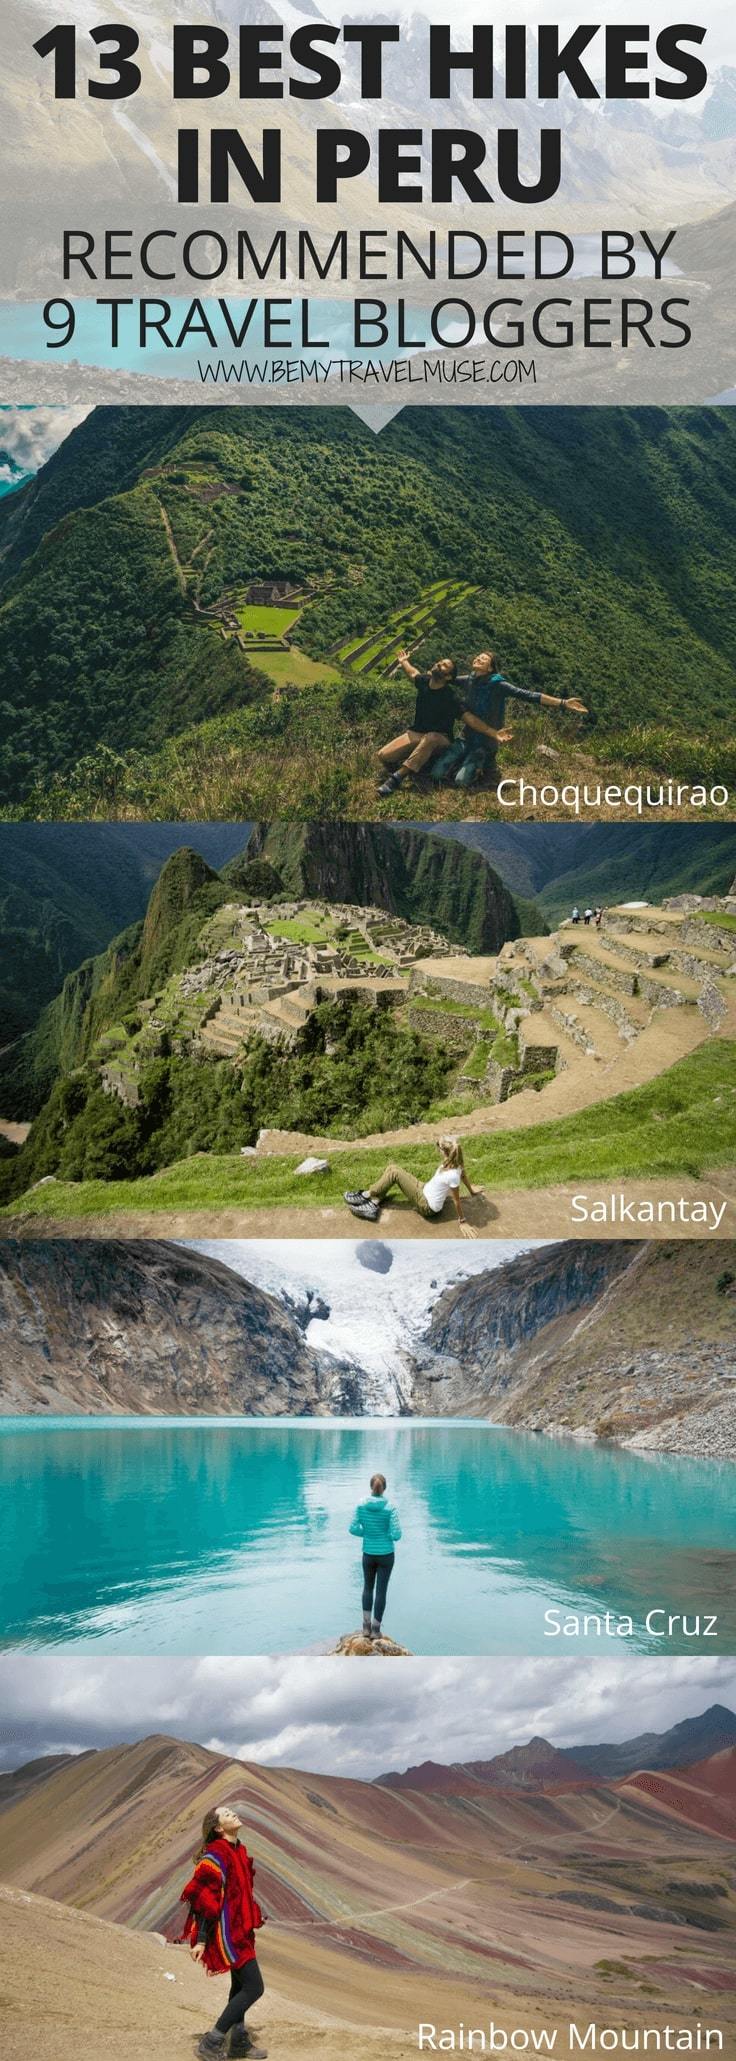 In this list, 9 travel bloggers share their favorite hikes in Peru. Planning for an adventure in Peru, but don't know which hiking trails are the best? This list covers popular trails, off the beaten path trails, easy, moderate and difficult hikes, plus secret tips, that will help you plan a perfect South America outdoor adventure in Peru #Peru #HikingTips